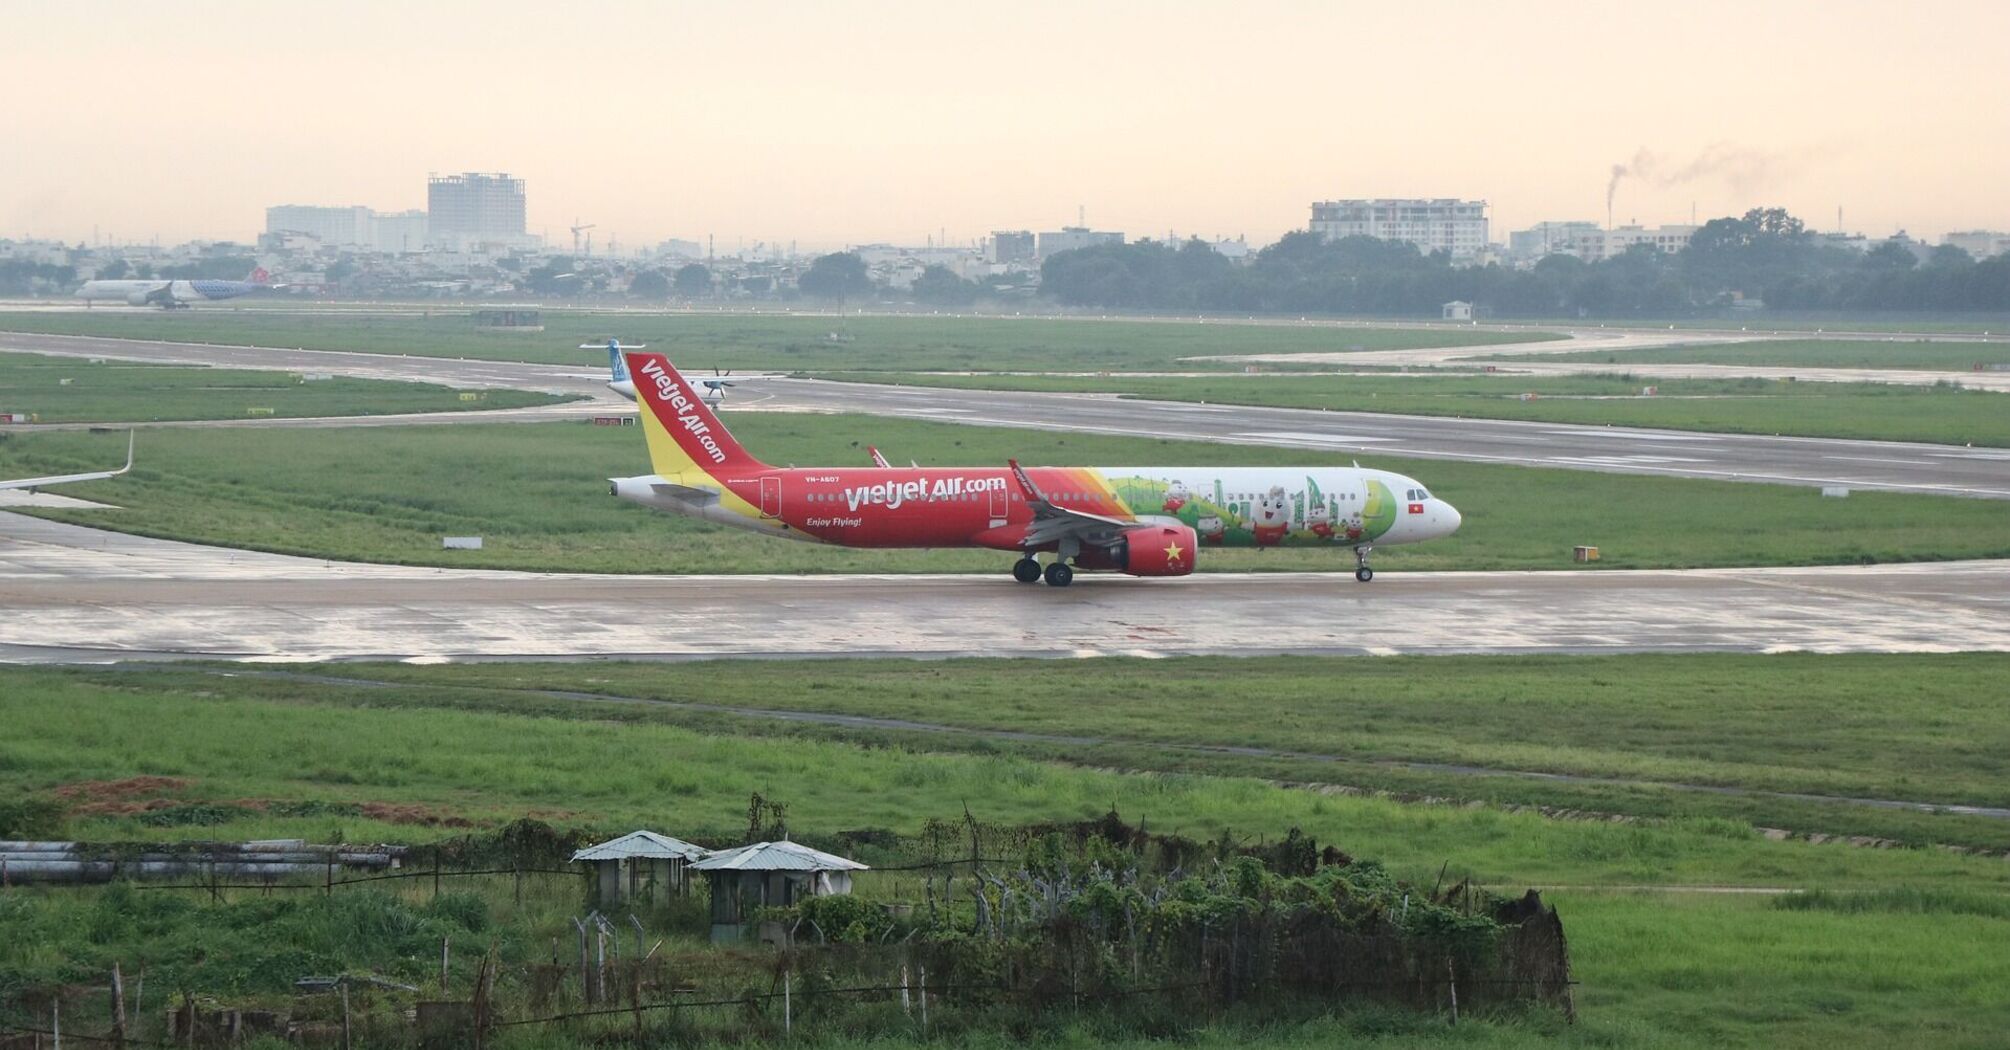 Vietjet airplane on a runway with grassy fields in the foreground and buildings in the distance 